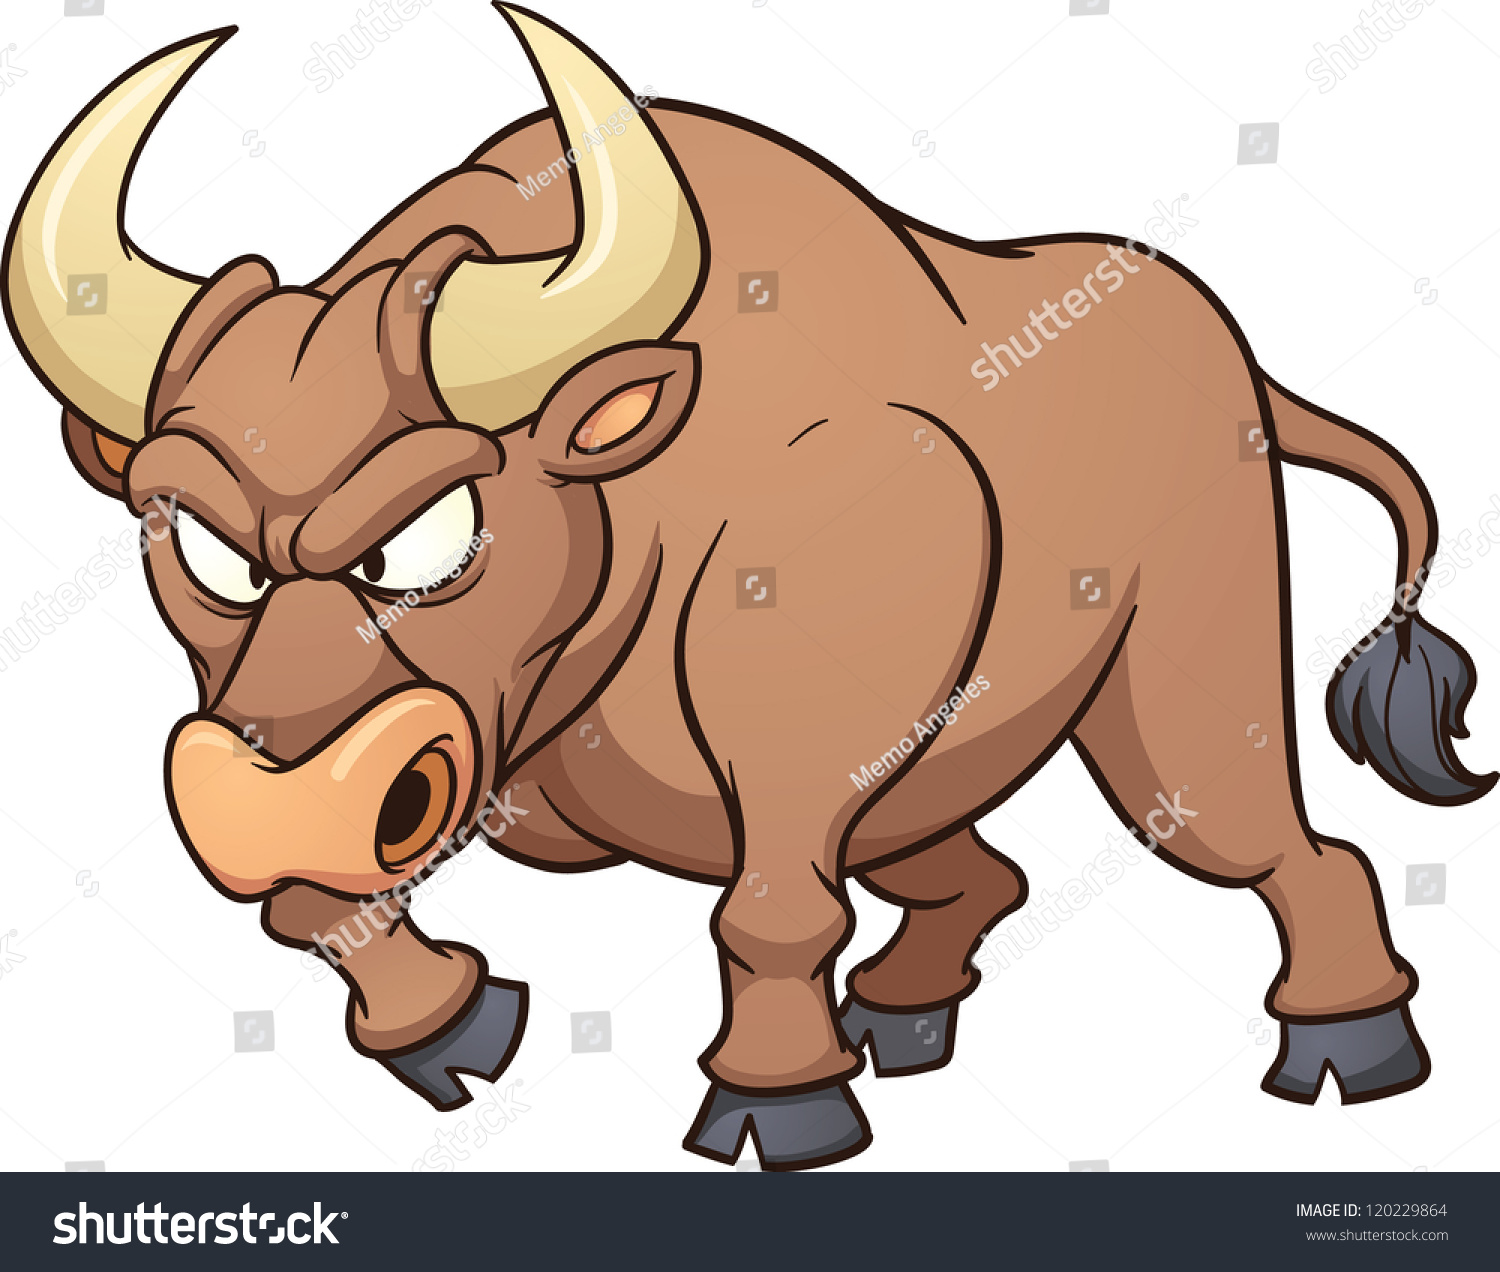 Angry 20 Clipart Angry Bull Images Pics